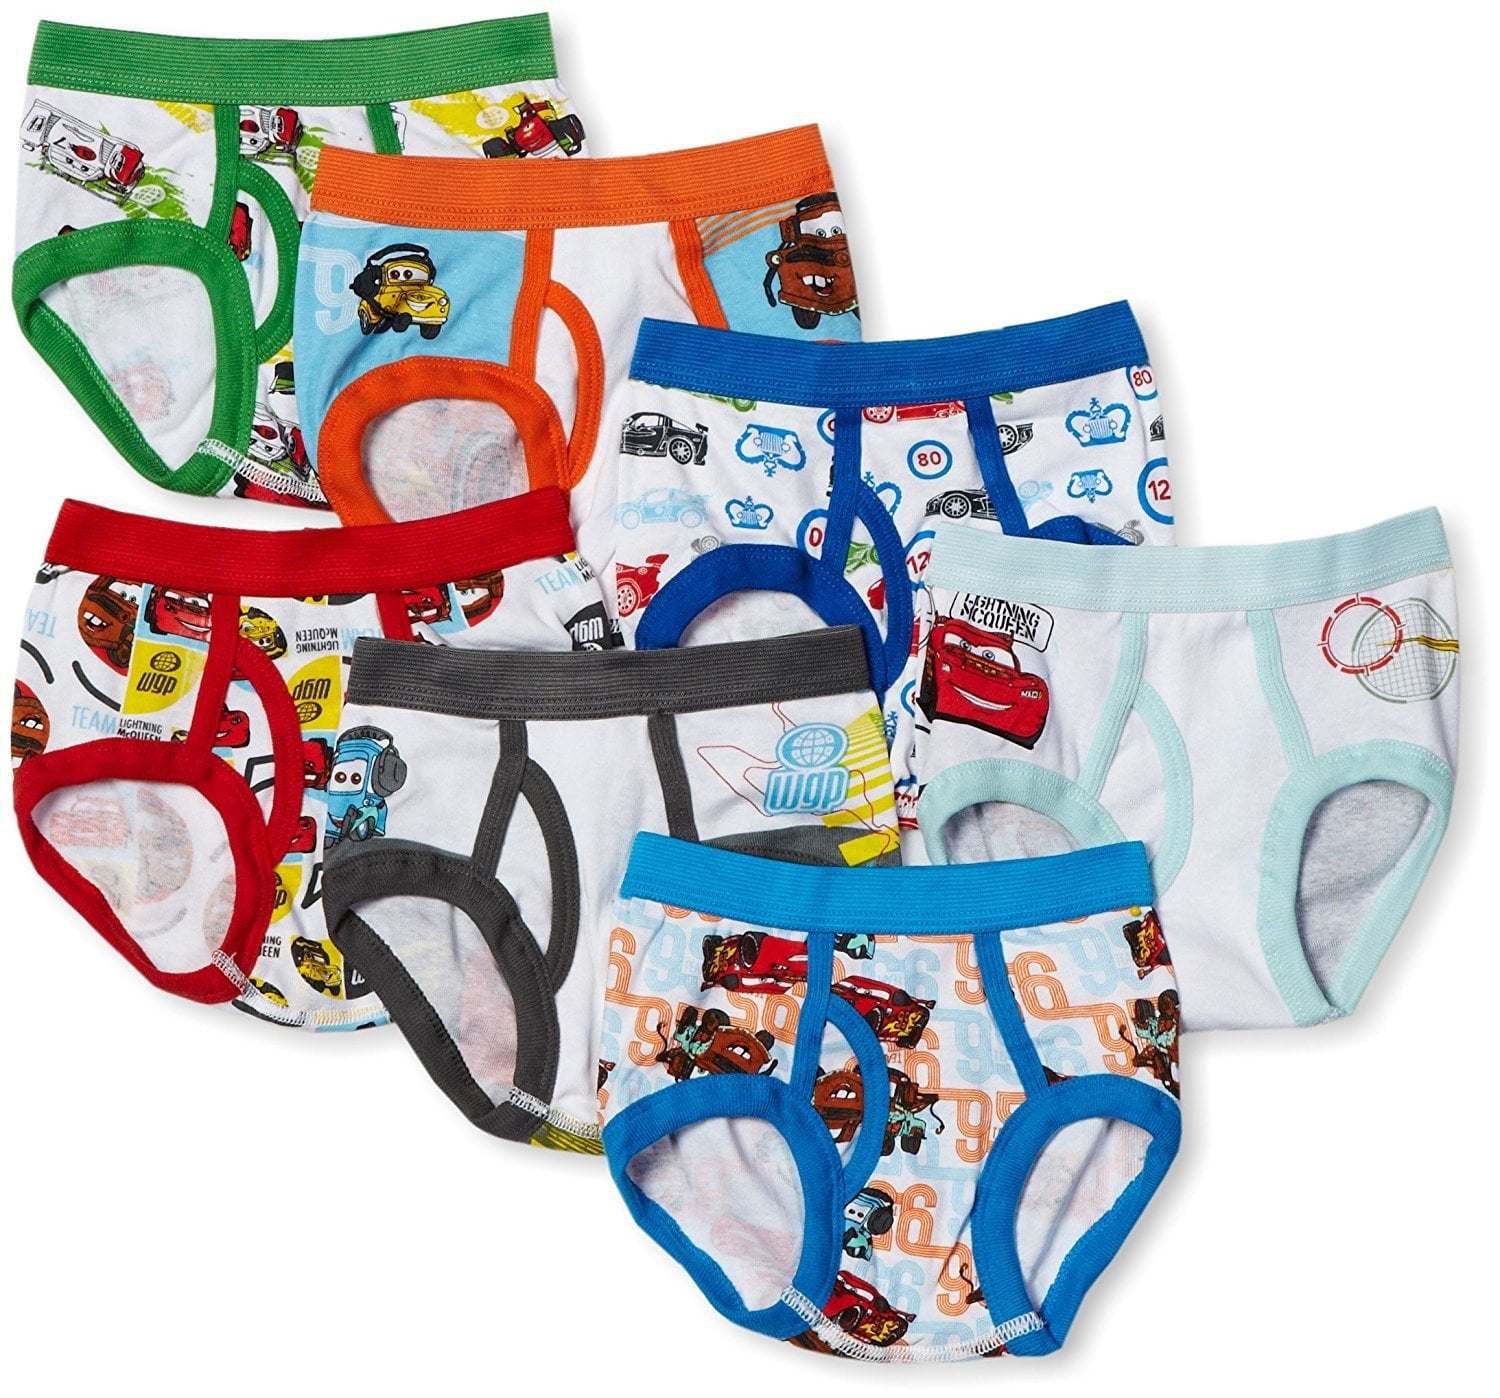 Children's Underwear Boy Panties Underpants Engineering Vehicle Cars Fire  Engine Comfortable Shorts Briefs Boxers For Kids - AliExpress